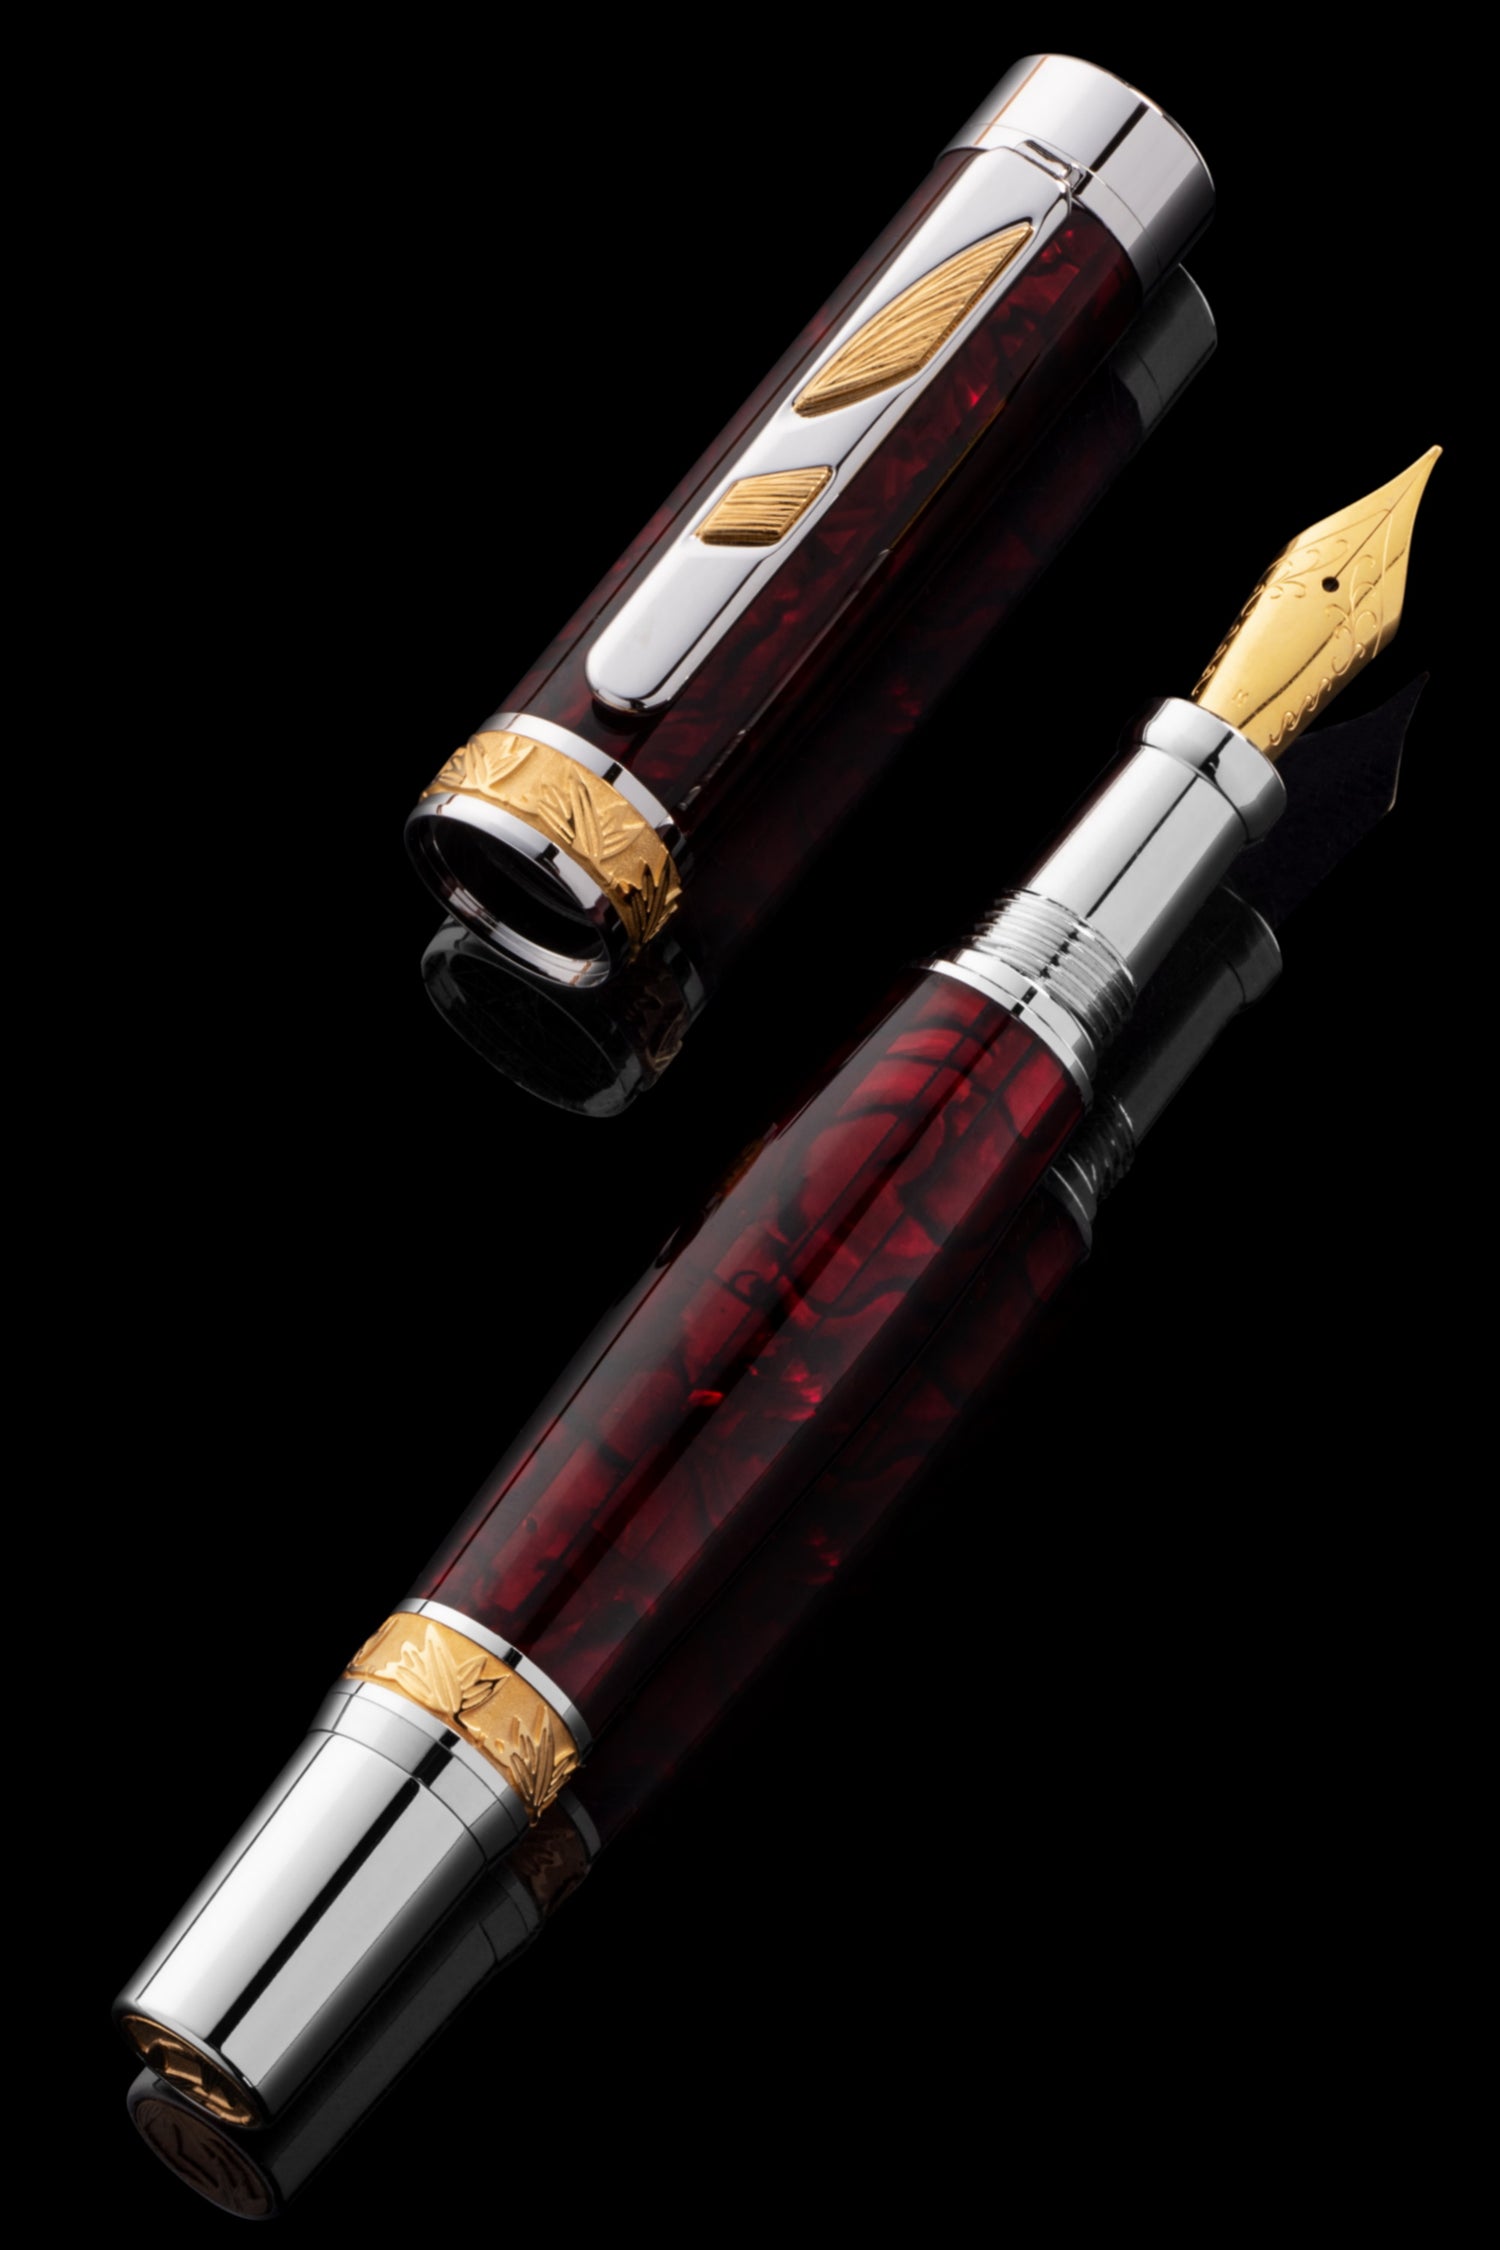 Premium Japanese Pens: What Is An Executive Pen And Which Should